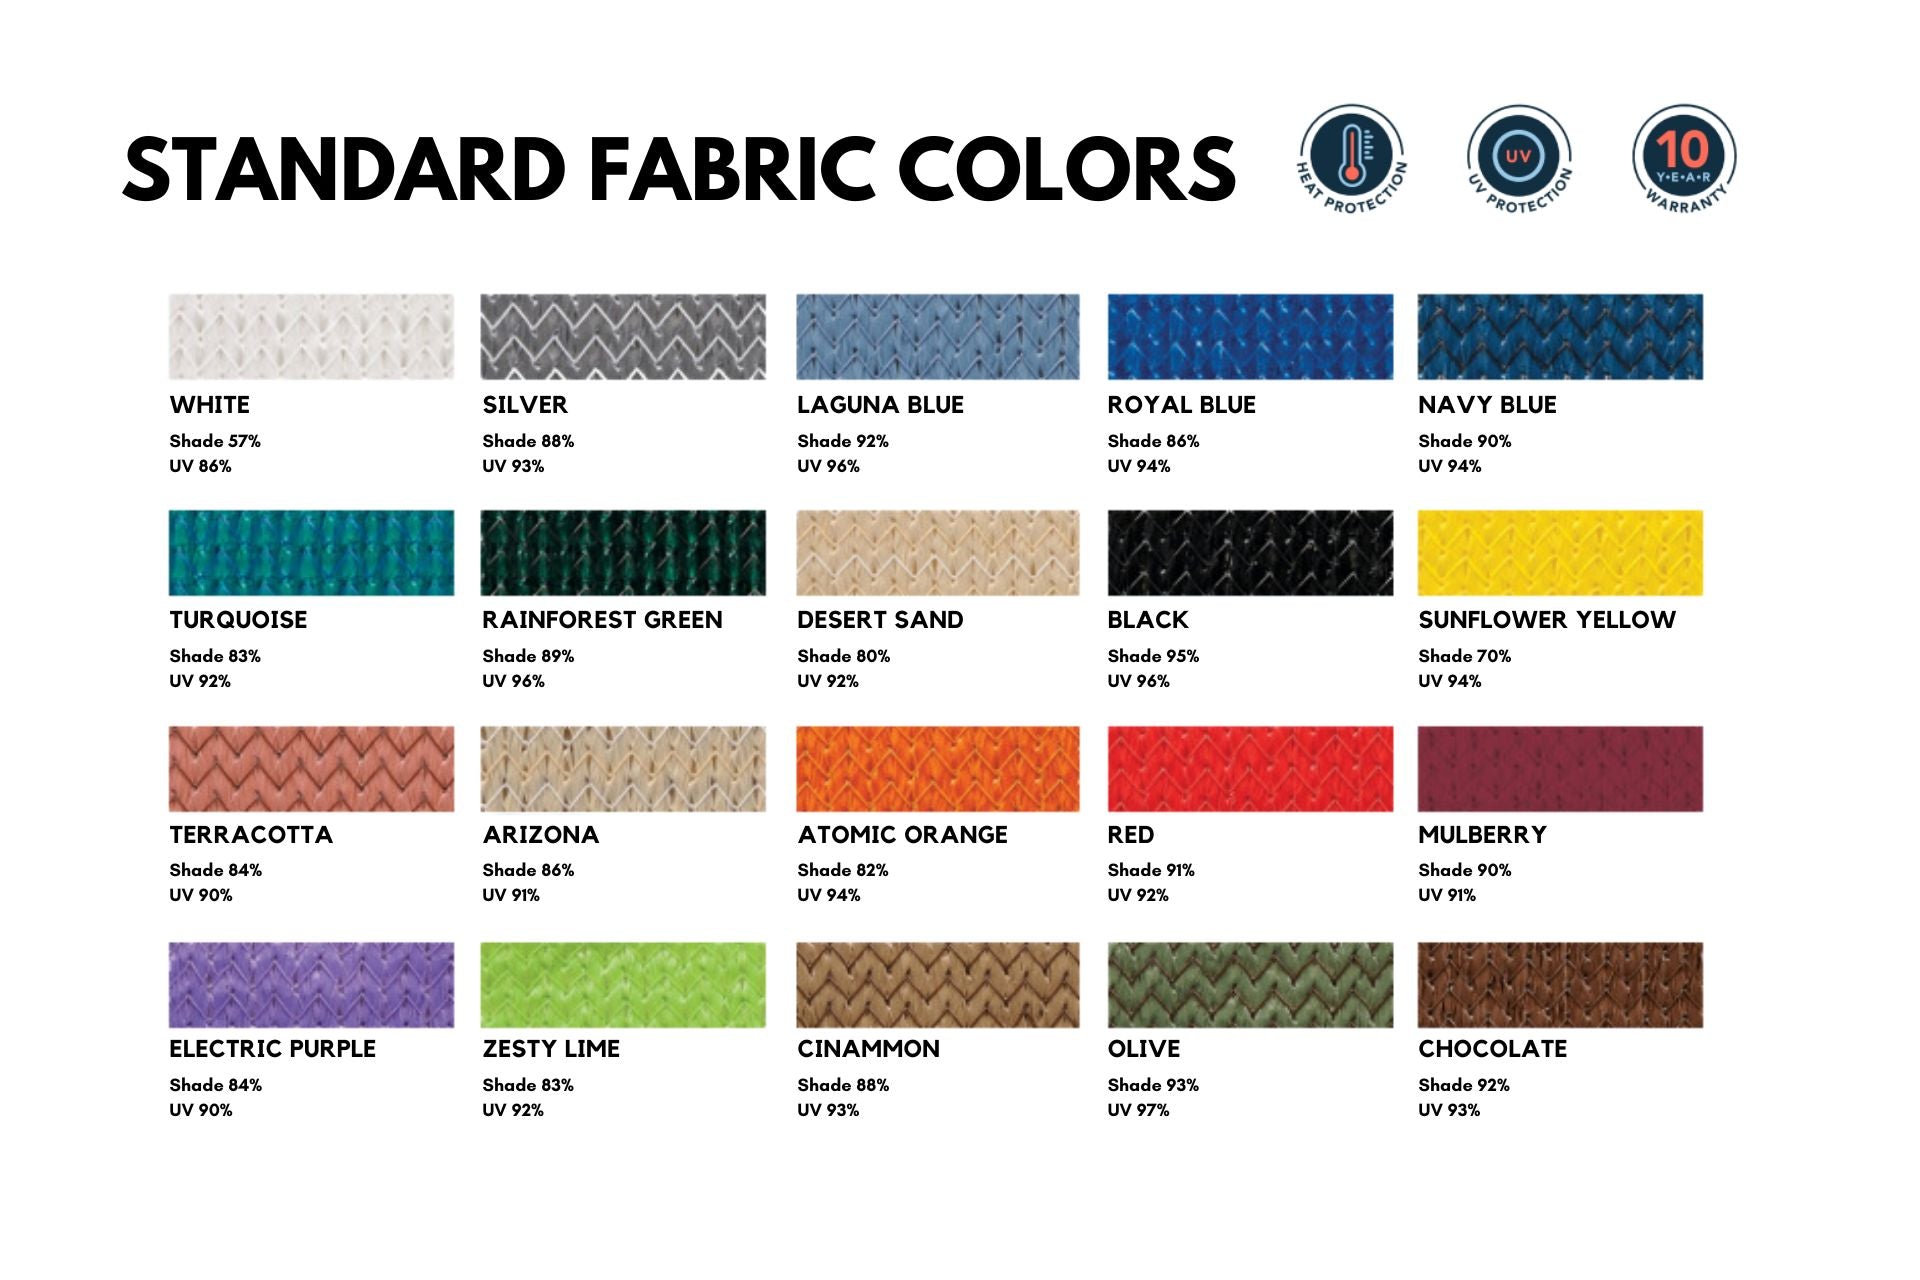 Standard Shade Fabric Colors